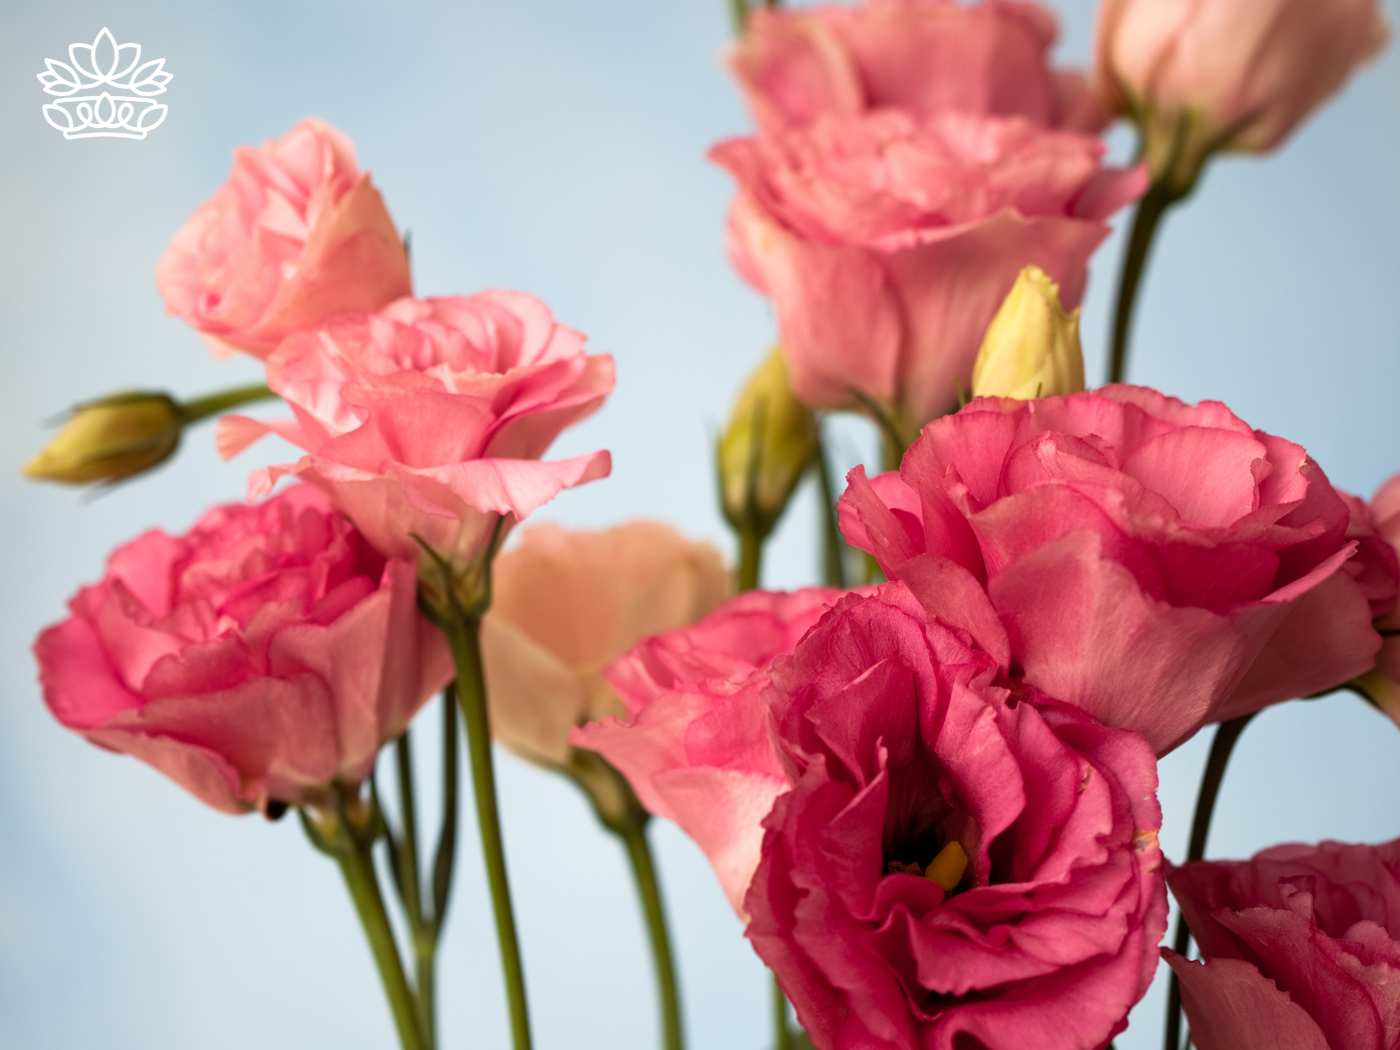 Close-up of soft pink lisianthus flowers, also known as Eustoma grandiflorum, captured in full bloom. These flowers represent the optimal bloom time to plant lisianthus, showcasing their delicate beauty. Featured in the Lisianthus Collection at Fabulous Flowers and Gifts